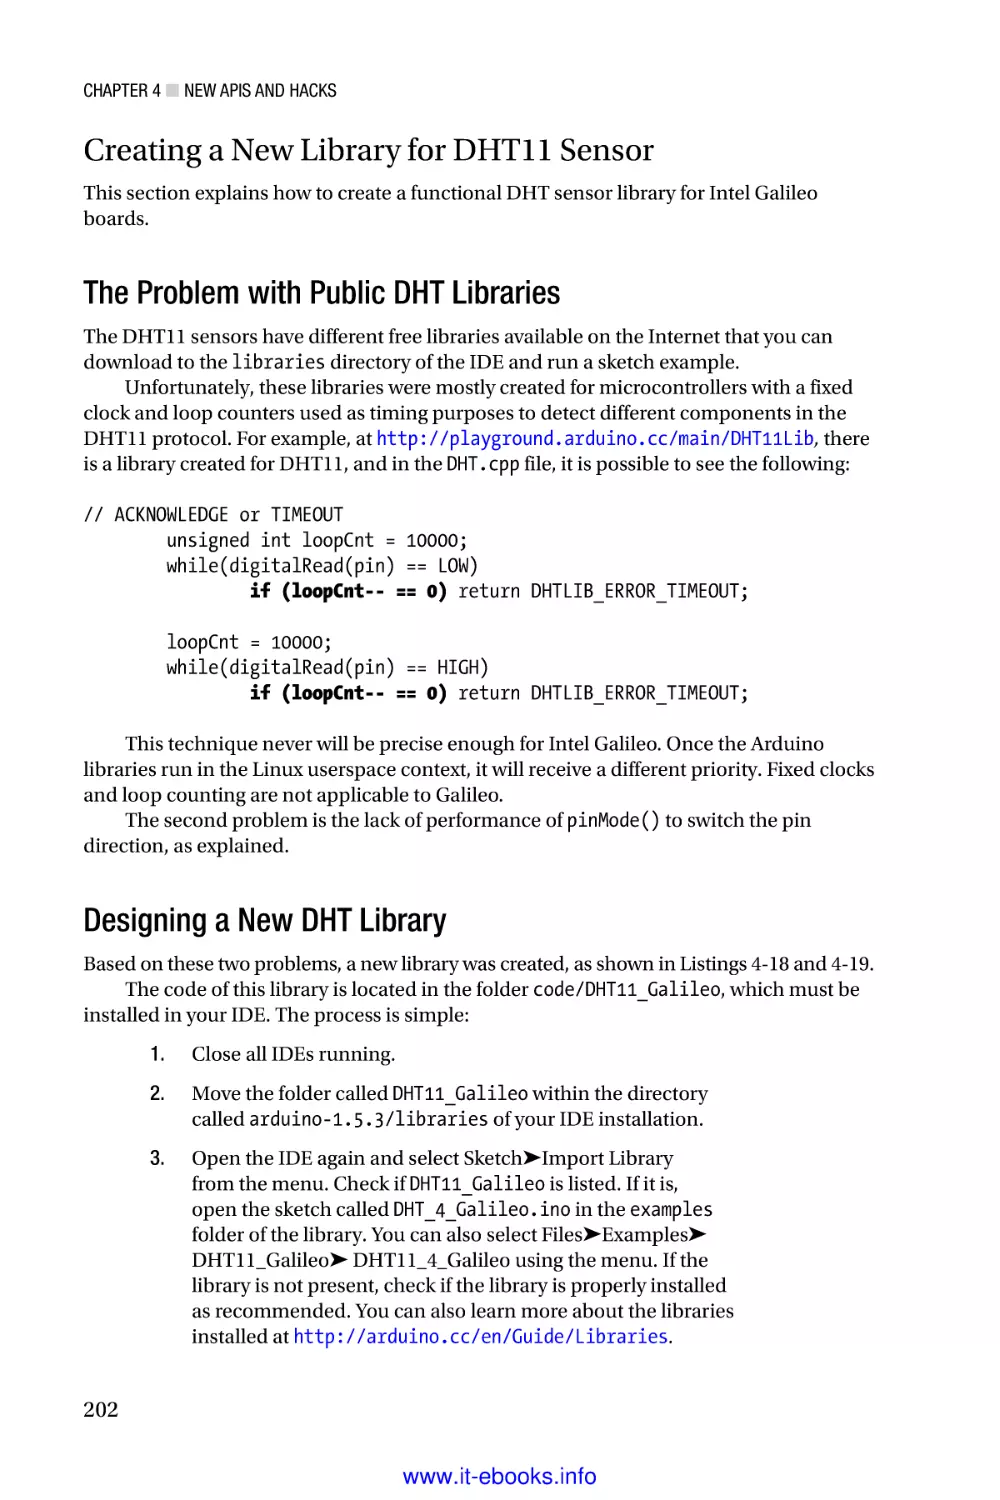 Creating a New Library for DHT11 Sensor
The Problem with Public DHT Libraries
Designing a New DHT Library